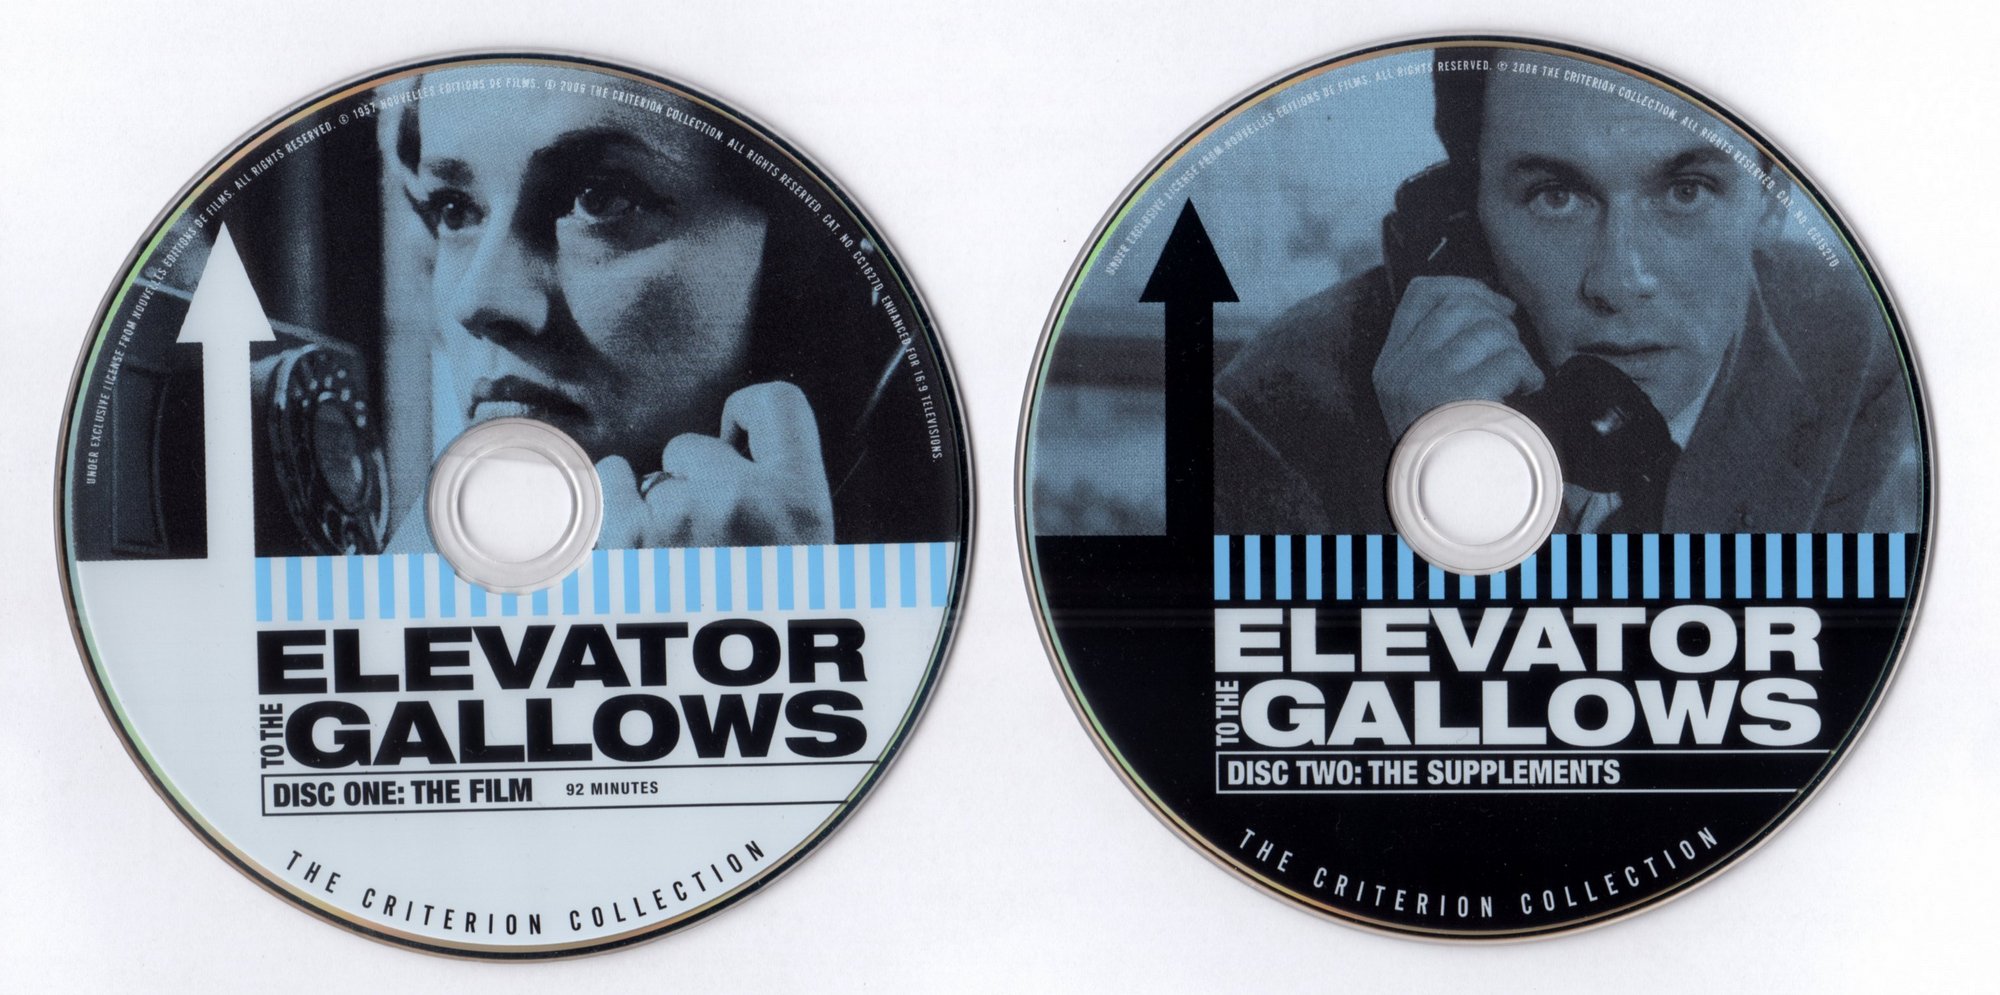 Elevator to the Gallows - The Criterion Channel